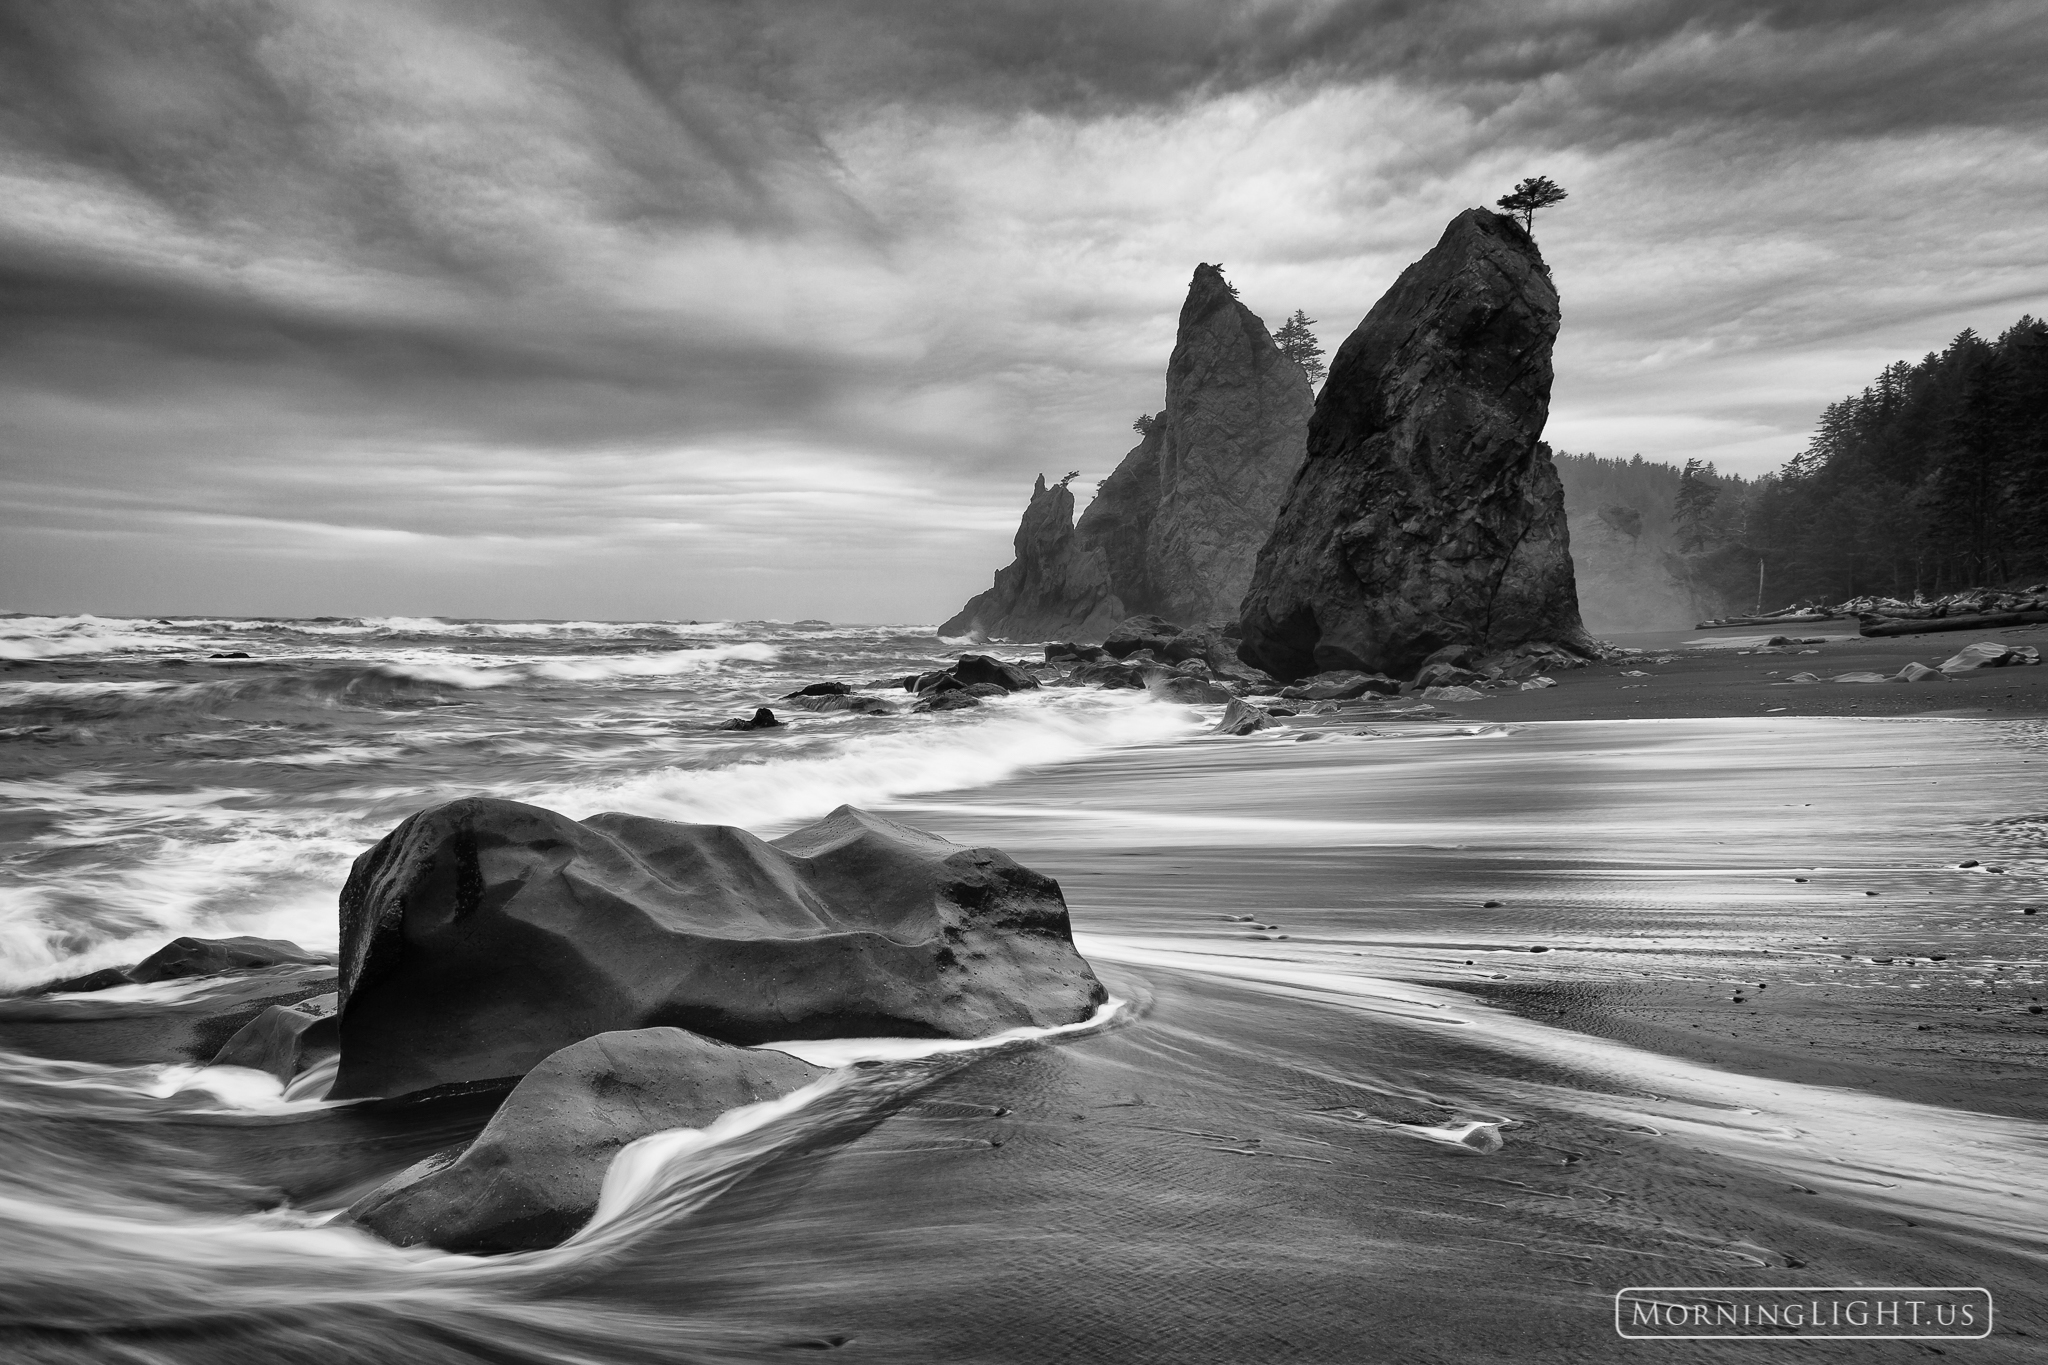 Rialto Beach in Olympic National Park is certainly one of my favorite locations in the entire park. On this evening the sky was...